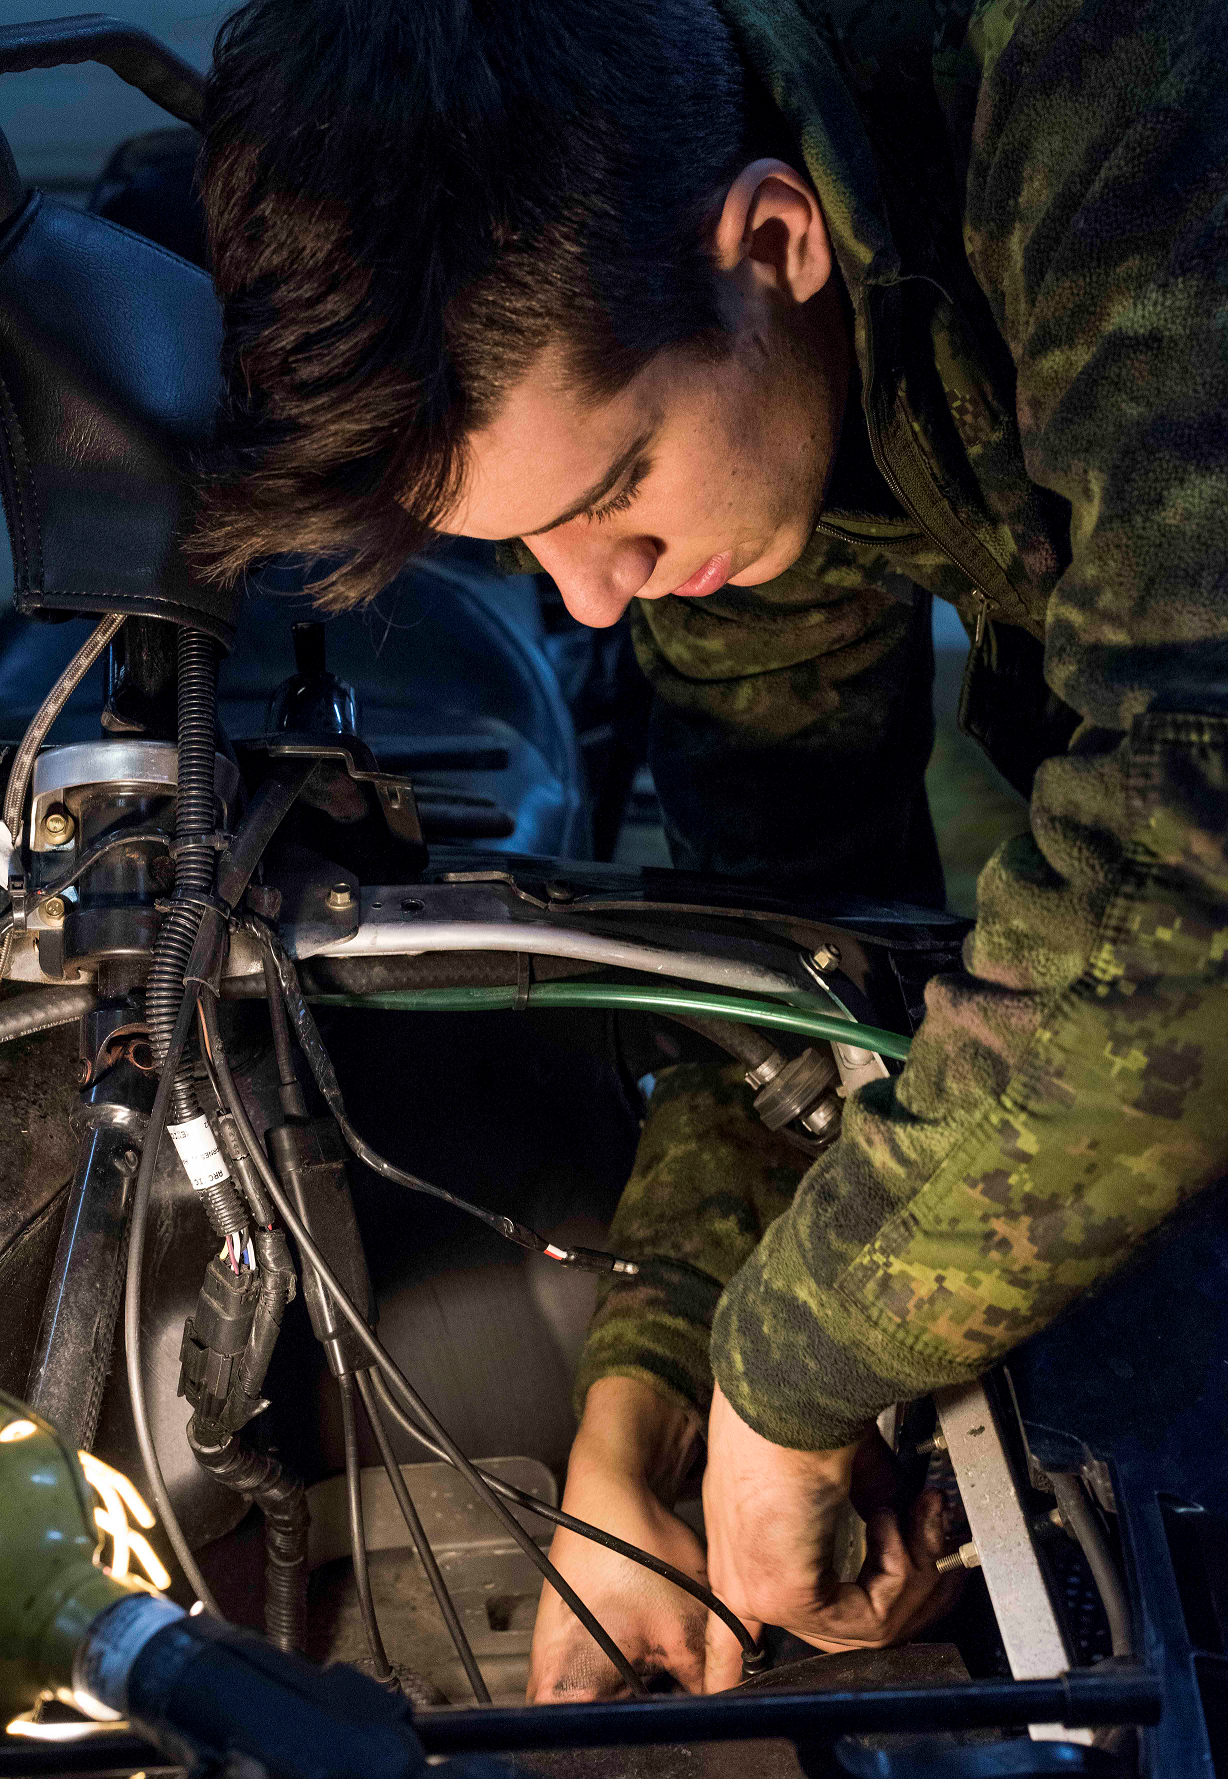 Corporal Kevin Potvin, a vehicle technician from 12e Régiment blindé du Canada replaces the carburetor of a Light Over Snow Vehicle during Operation NUNALIVUT 2017 in Hall Beach, Nunavut, February 27, 2017. (Photo: Sgt Jean-François Lauzé, Task Force Imagery Technician)